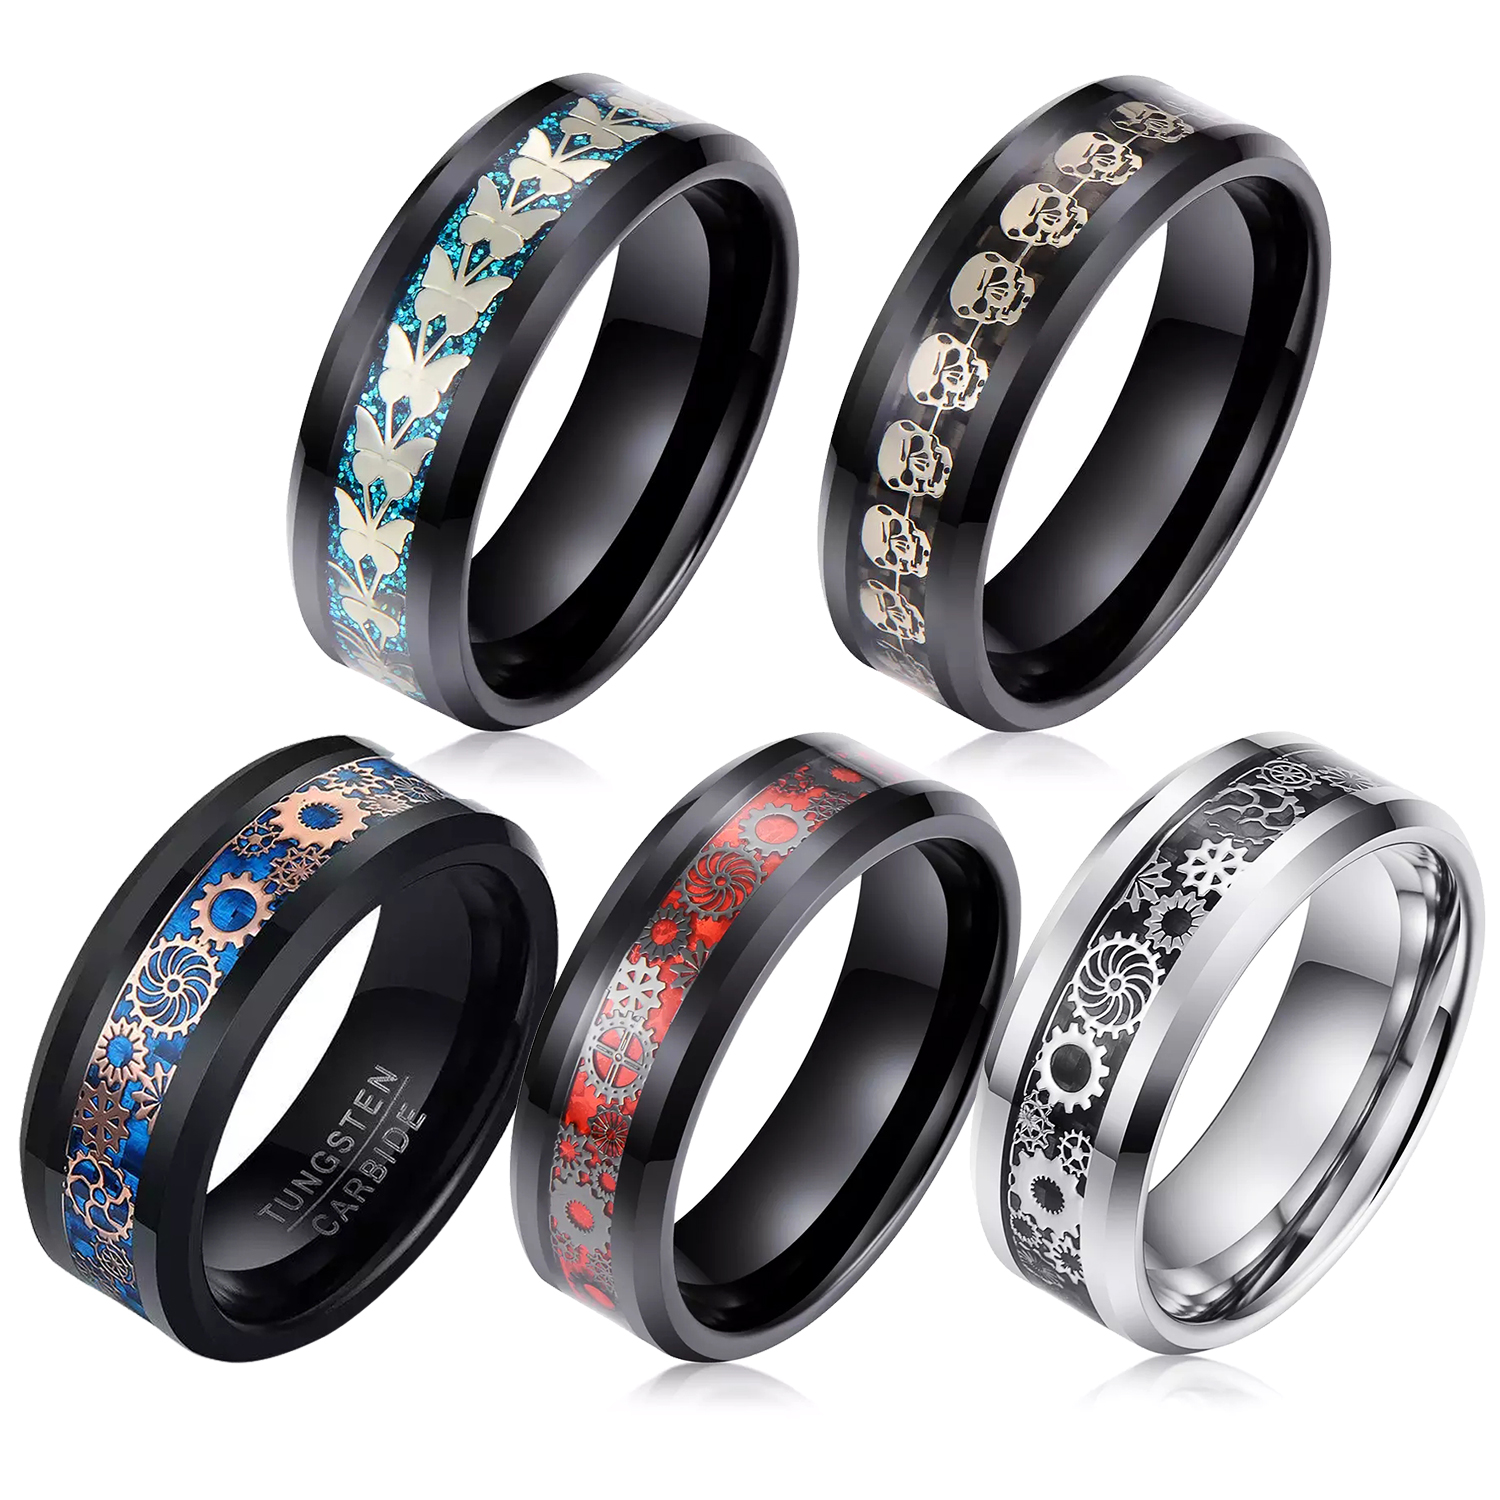 Two Tones Black Celtic Dragon 8mm Mens Tungsten Ring With Blue Carbon Fibre Pattern Wedding Band Featured Image